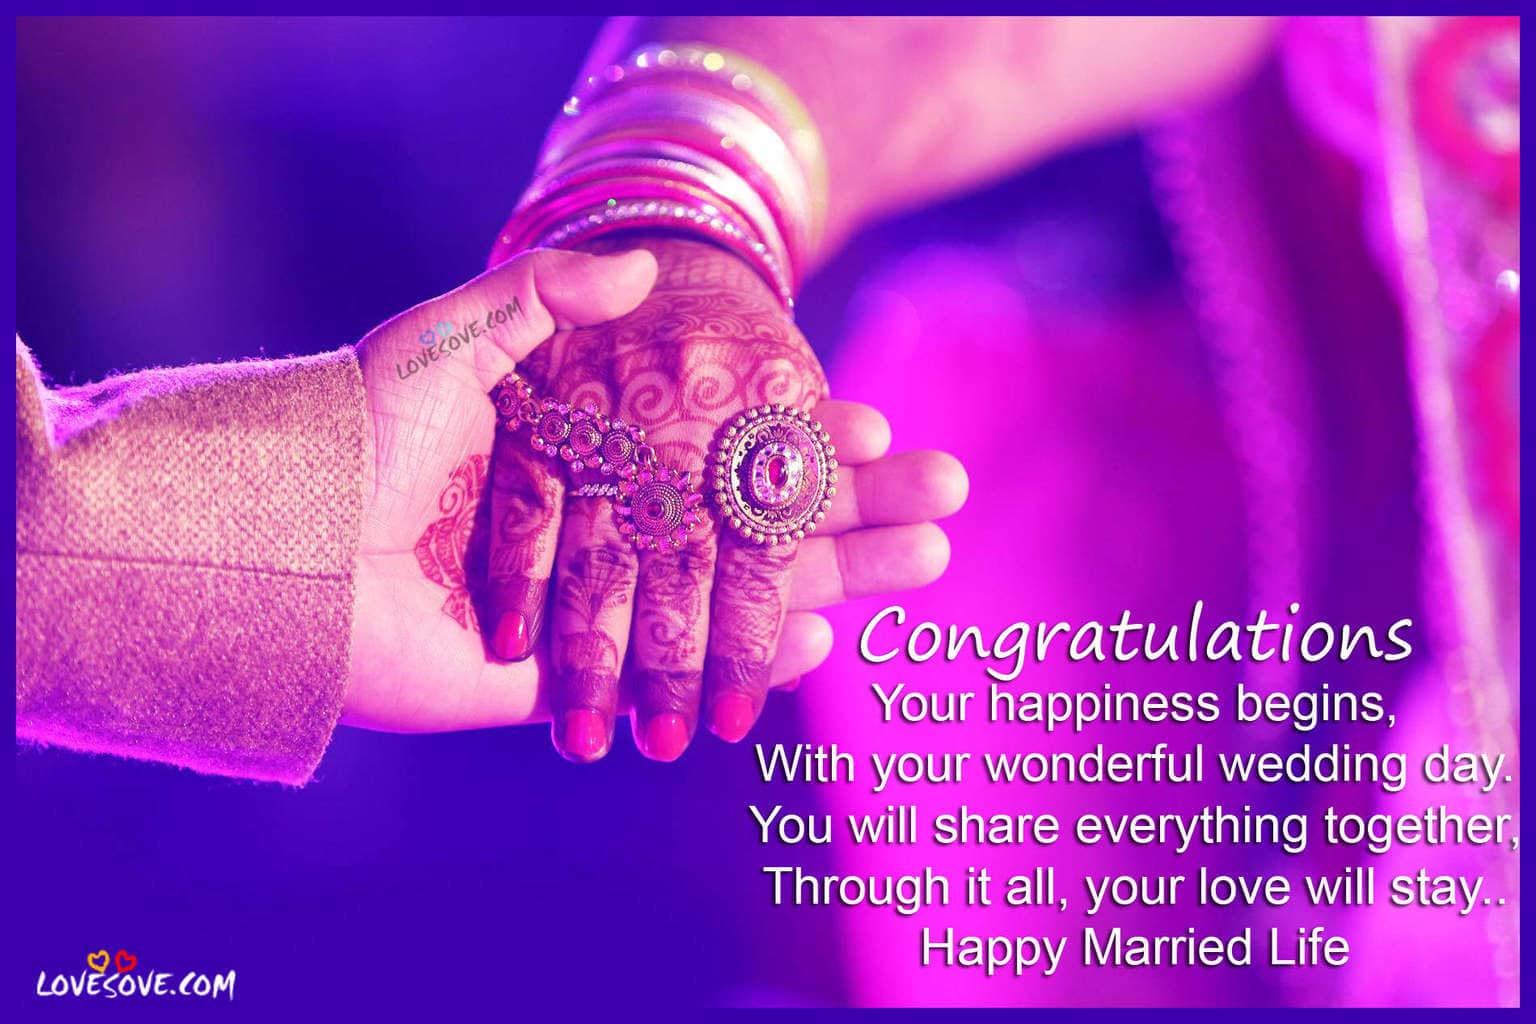 https://www.lovesove.com/wp-content/uploads/2017/05/Happy-married-life-happy-wedding-day-wishes.jpg